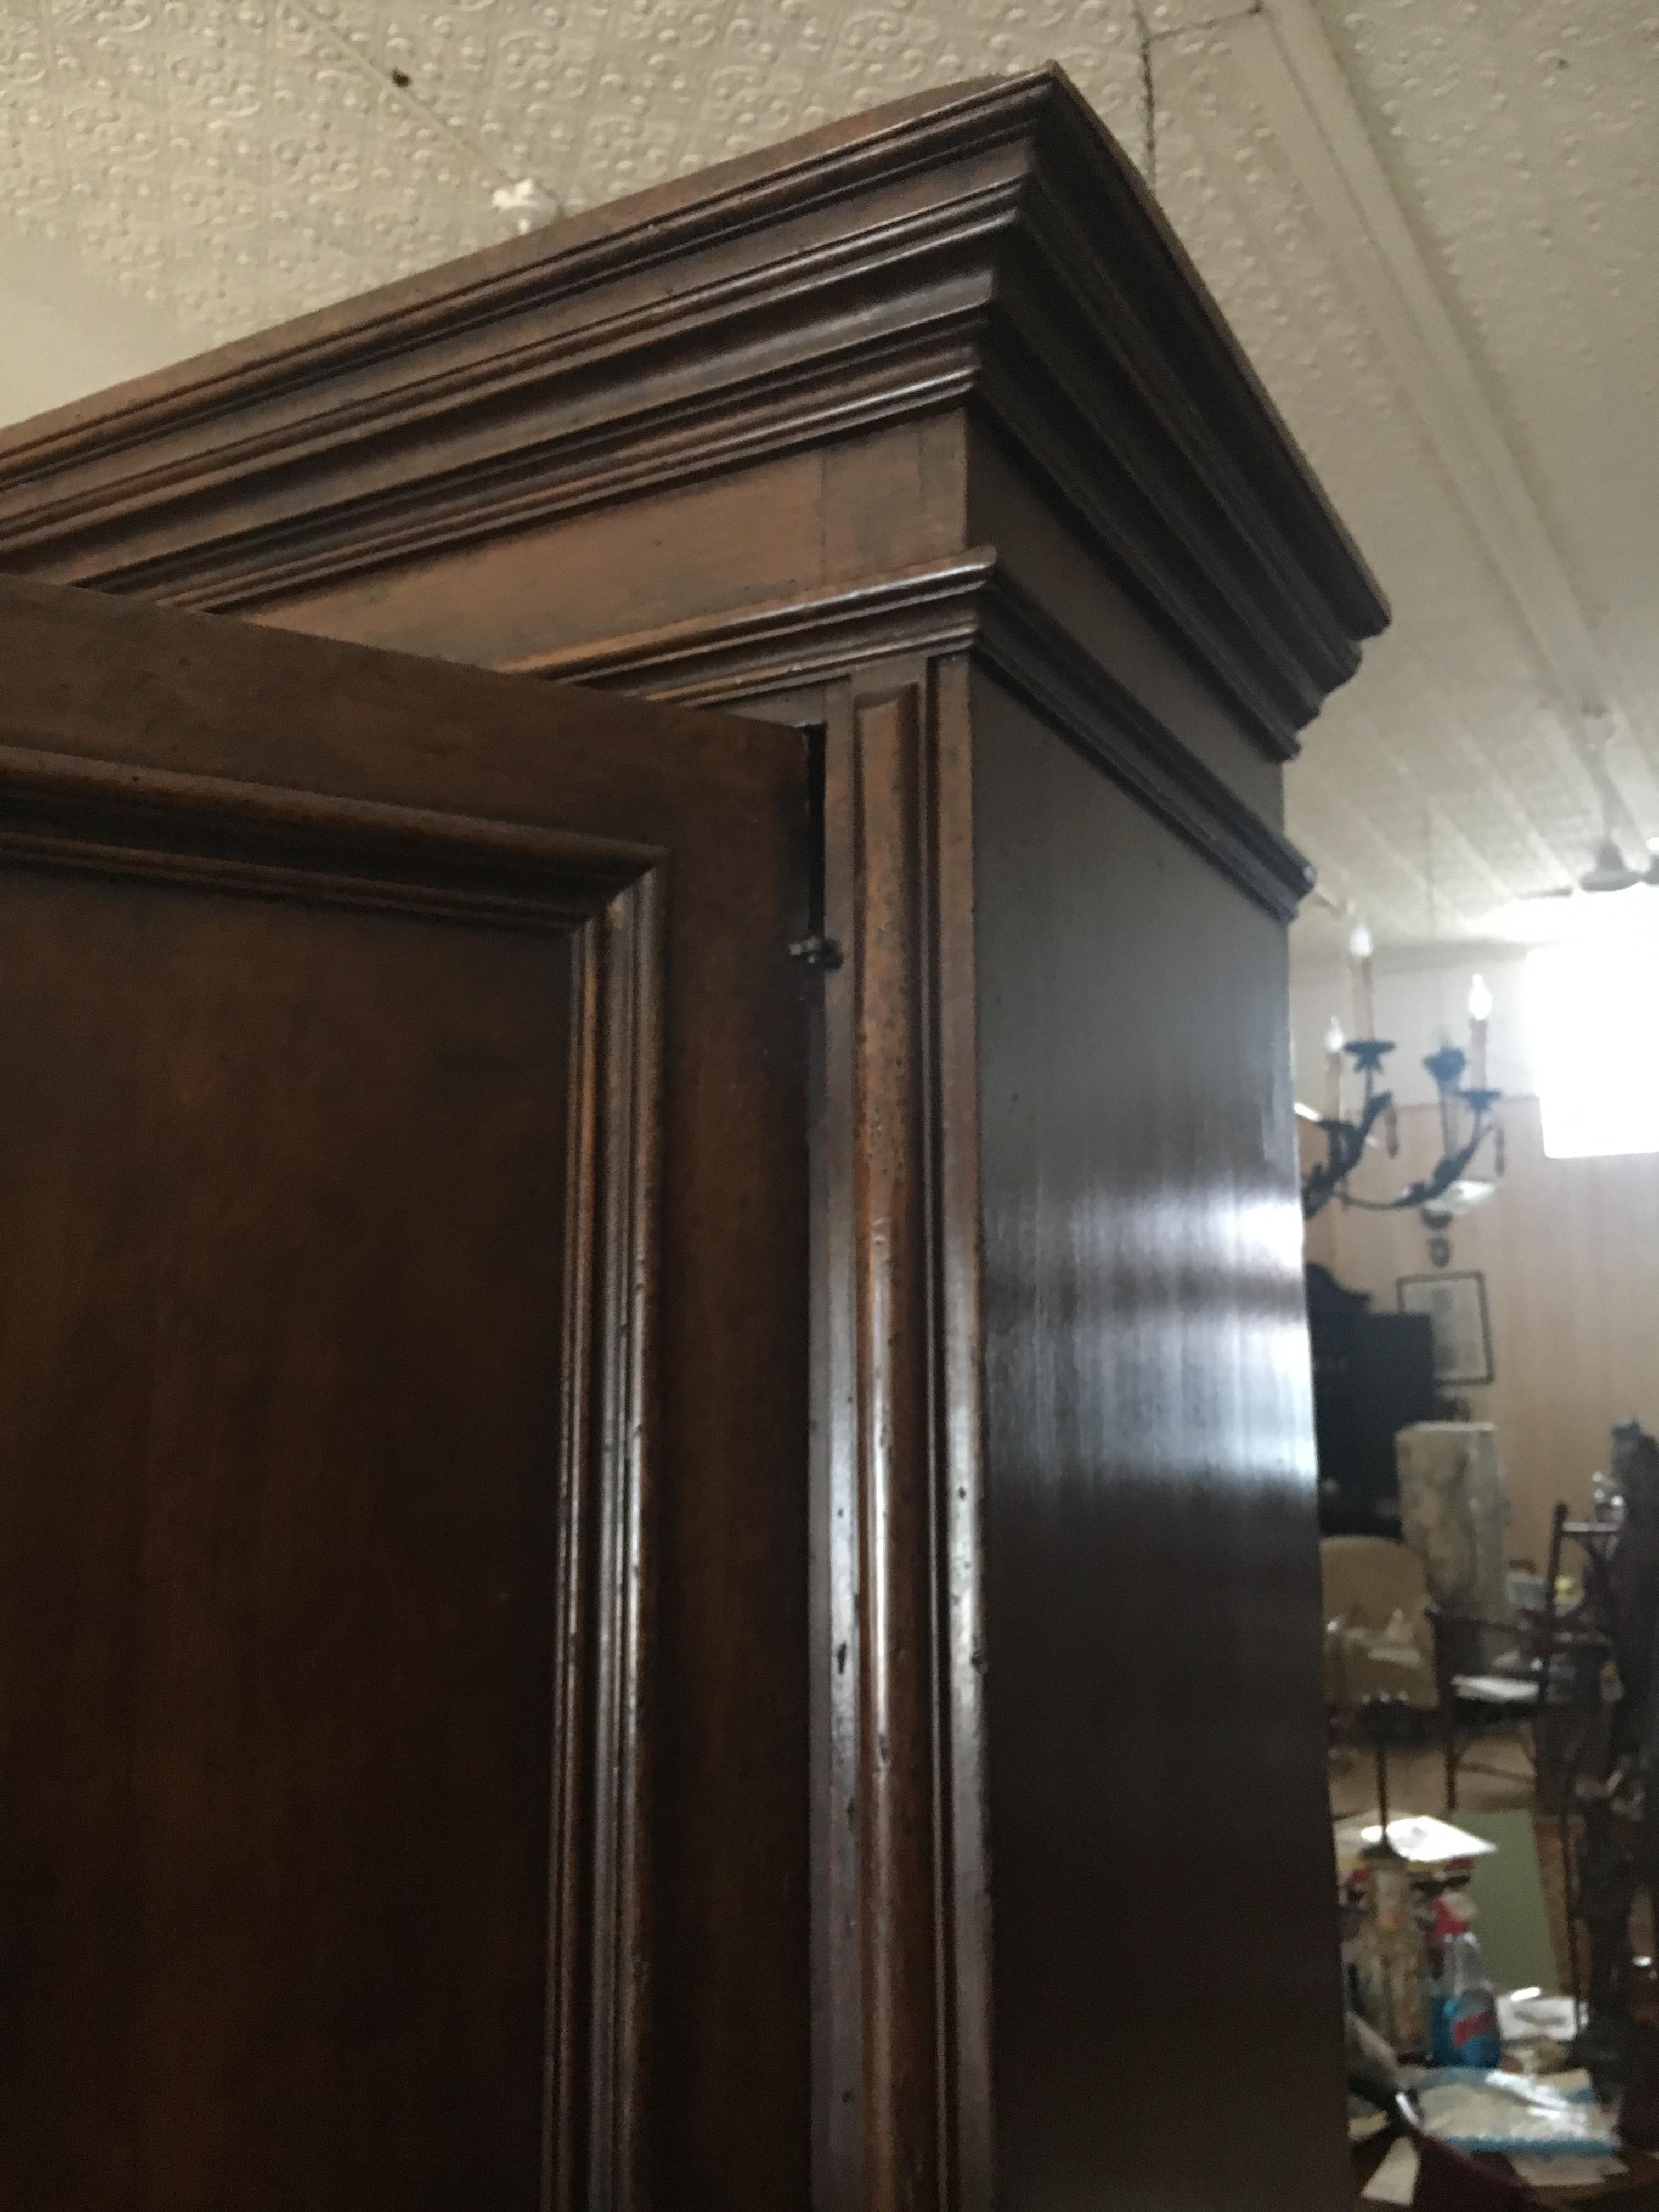 Very handsome early 19th Italian or Flemish cabinet, two doors over two drawers over two doors, walnut. Nicely detailed carving. Great storage, bar, anchor piece.